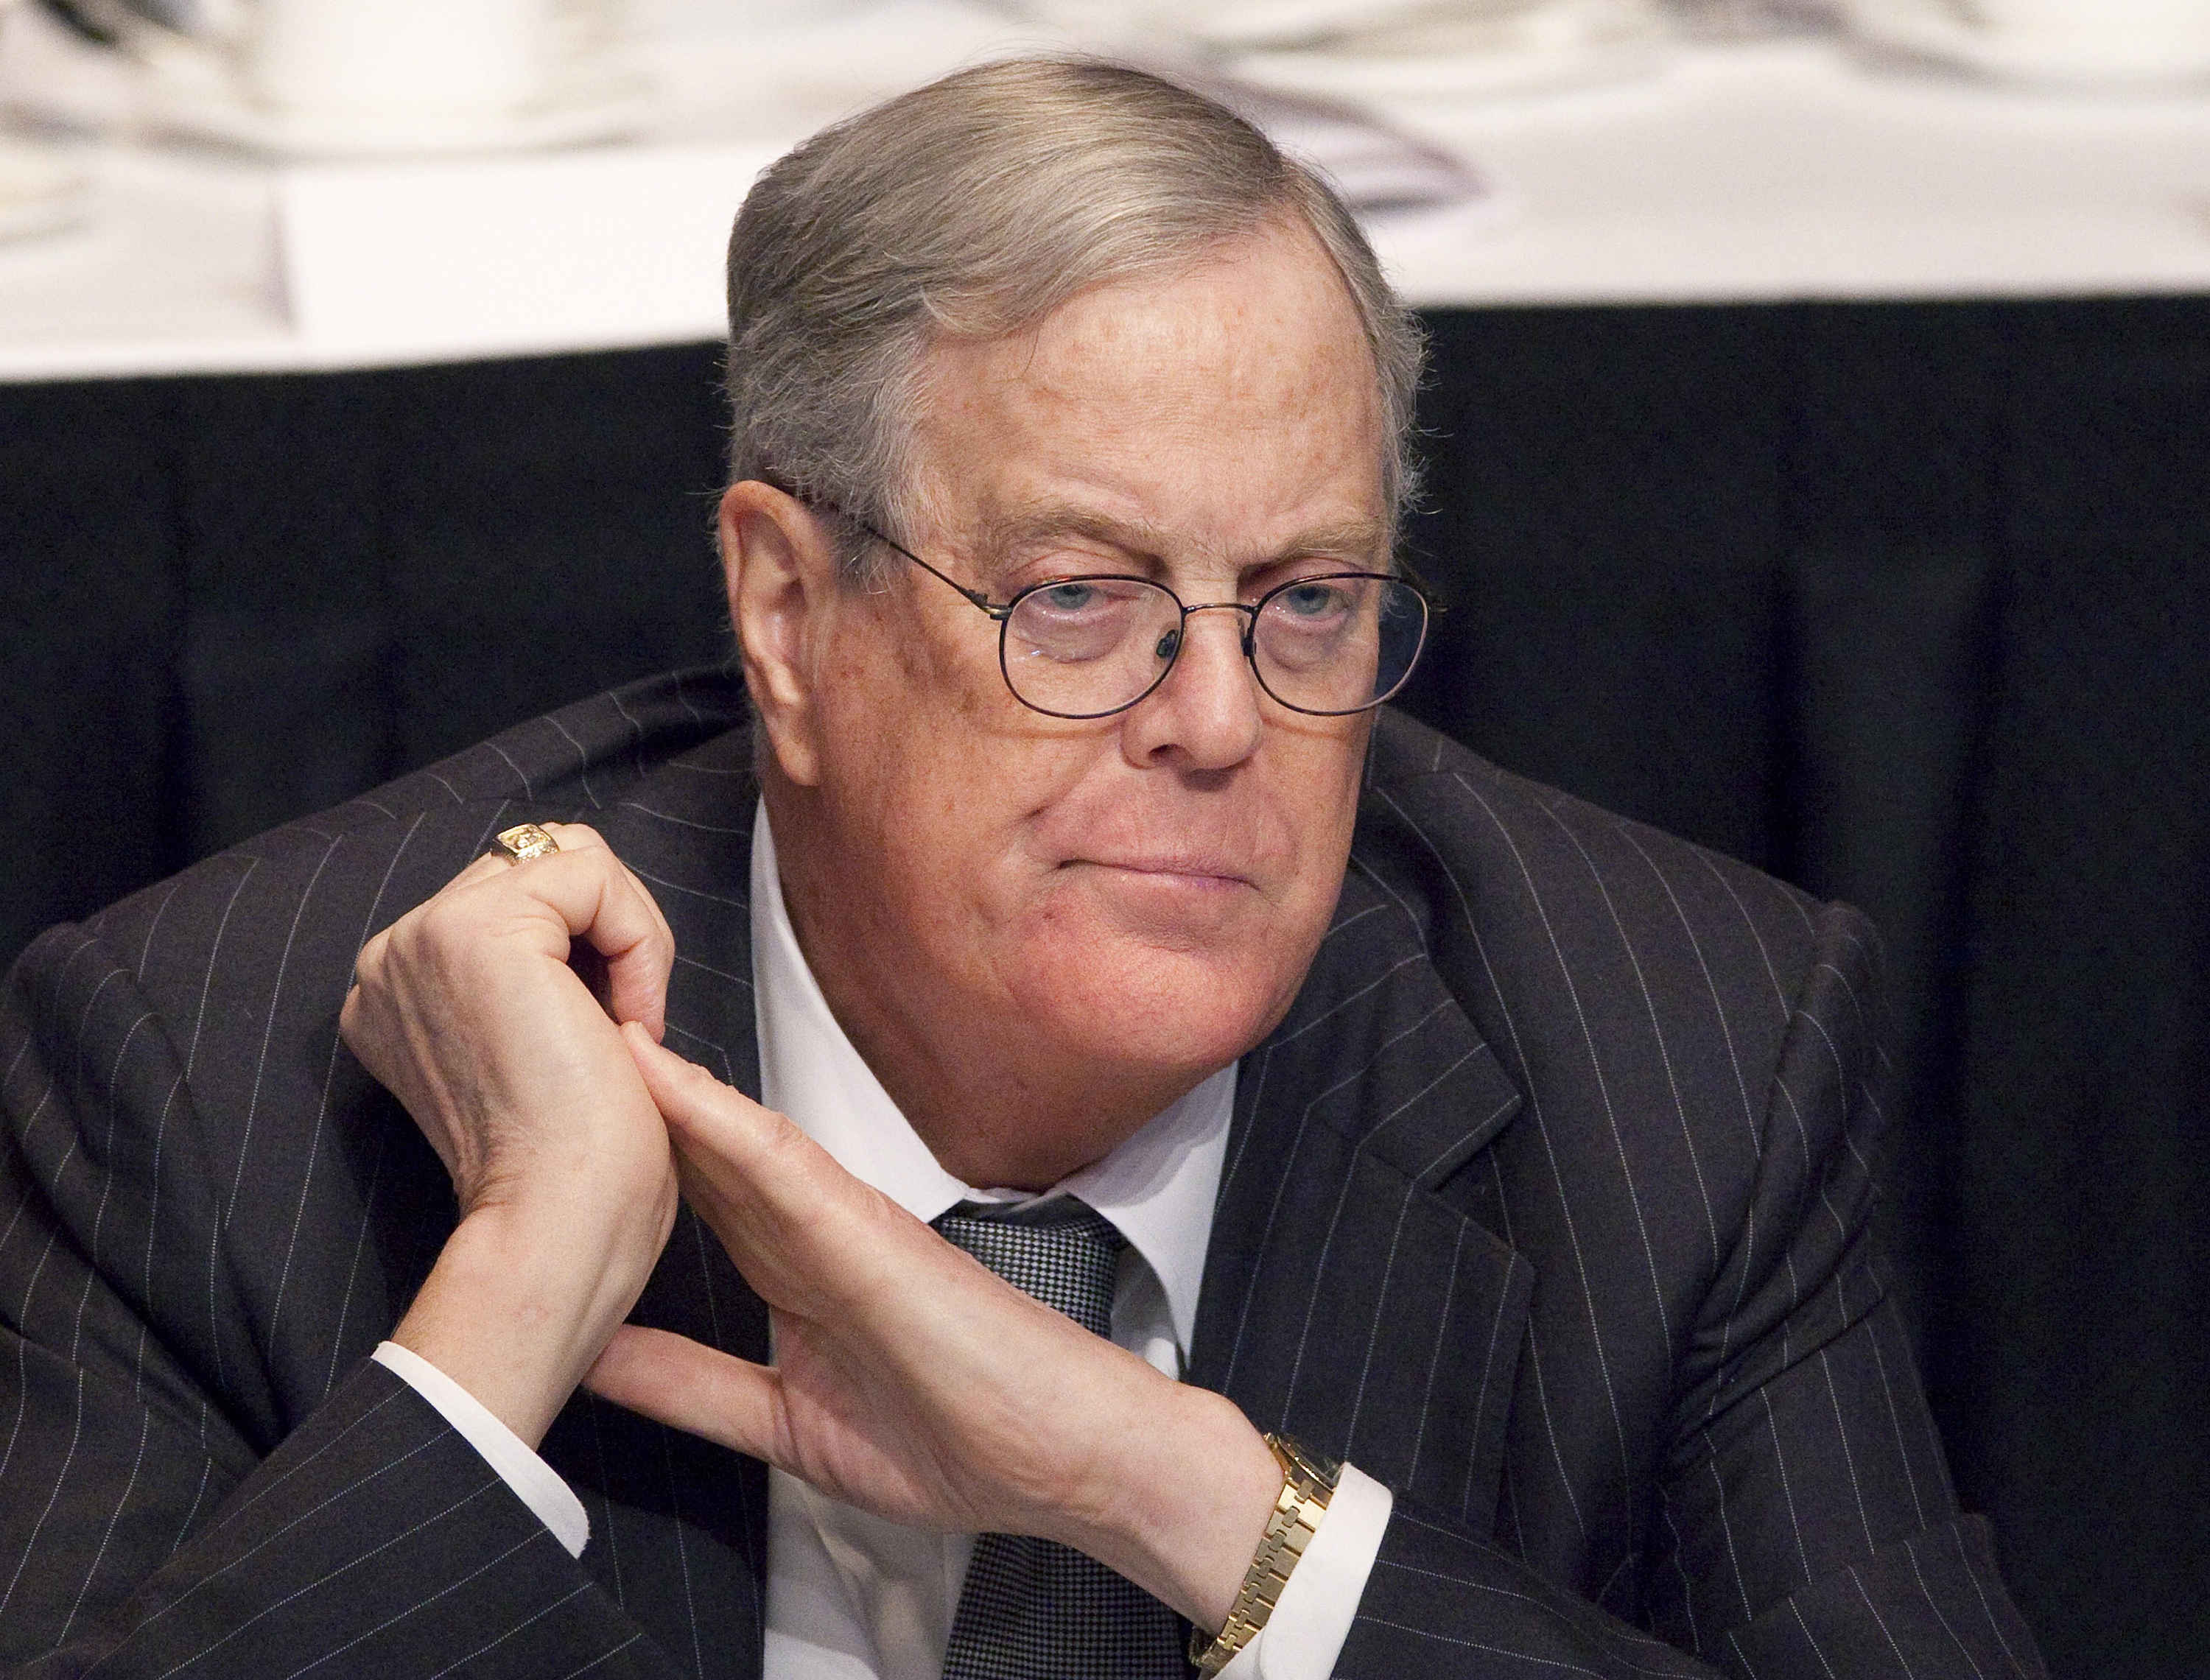 True or False? Koch Brothers Group Abandons Its Misleading Anti-Obamacare Ads